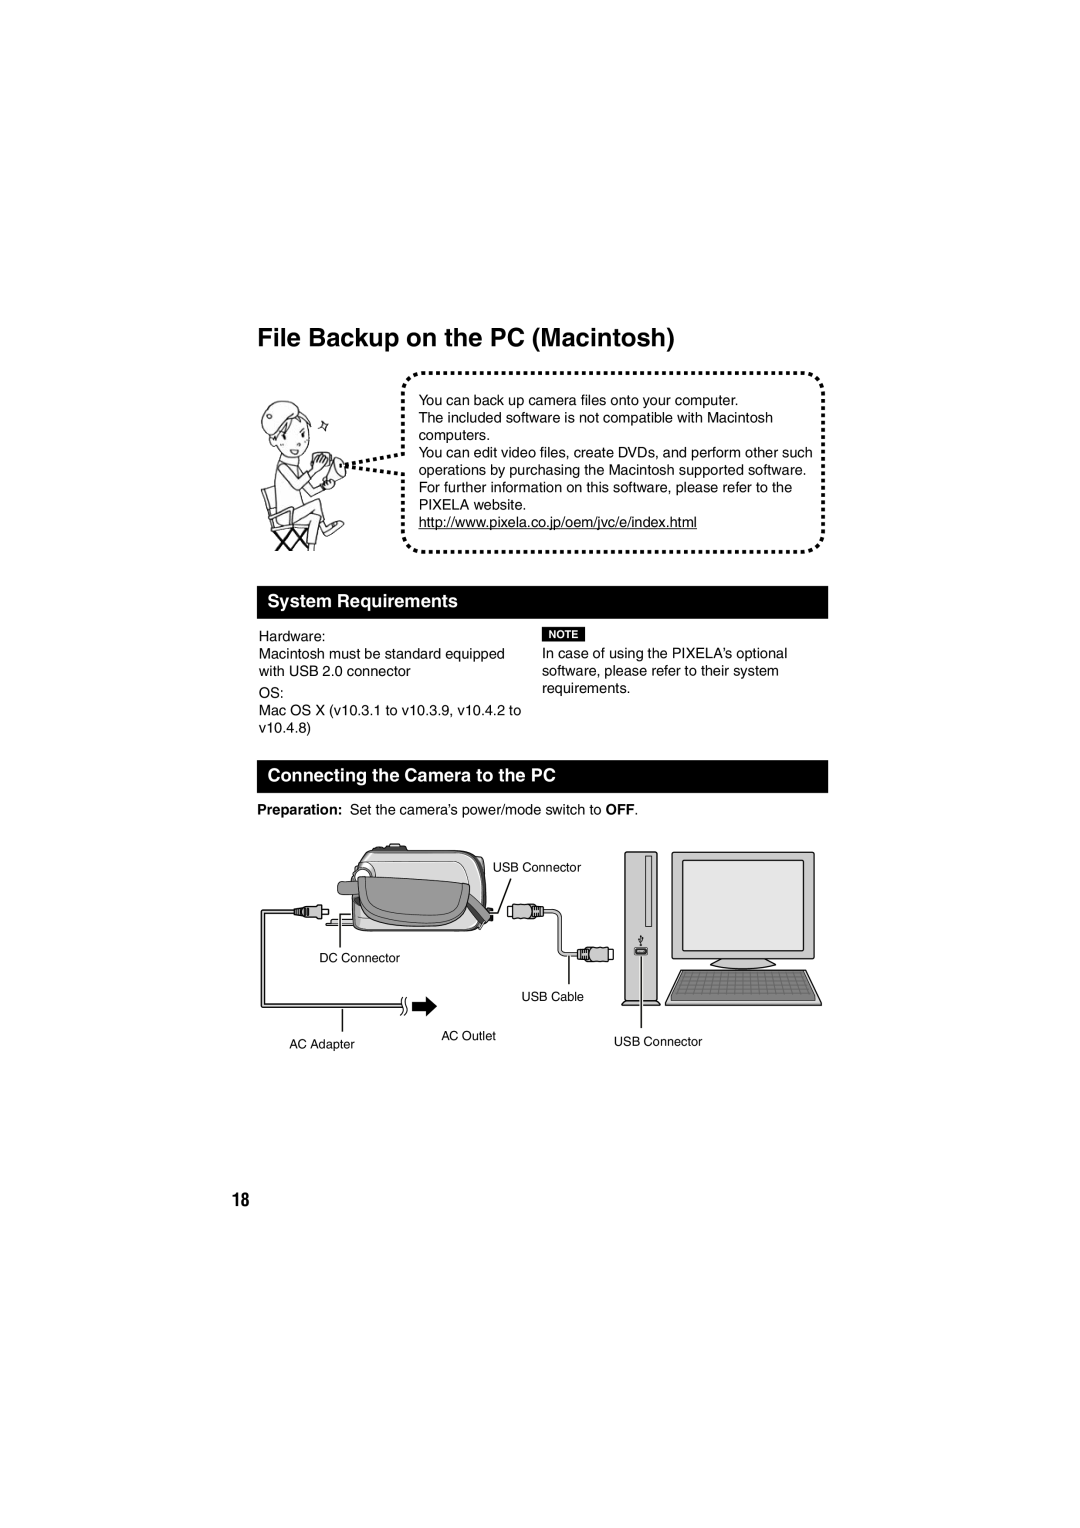 JVC GZ-MG255E/EK, GZ-MG155E/EK File Backup on the PC Macintosh, System Requirements, Connecting the Camera to the PC 